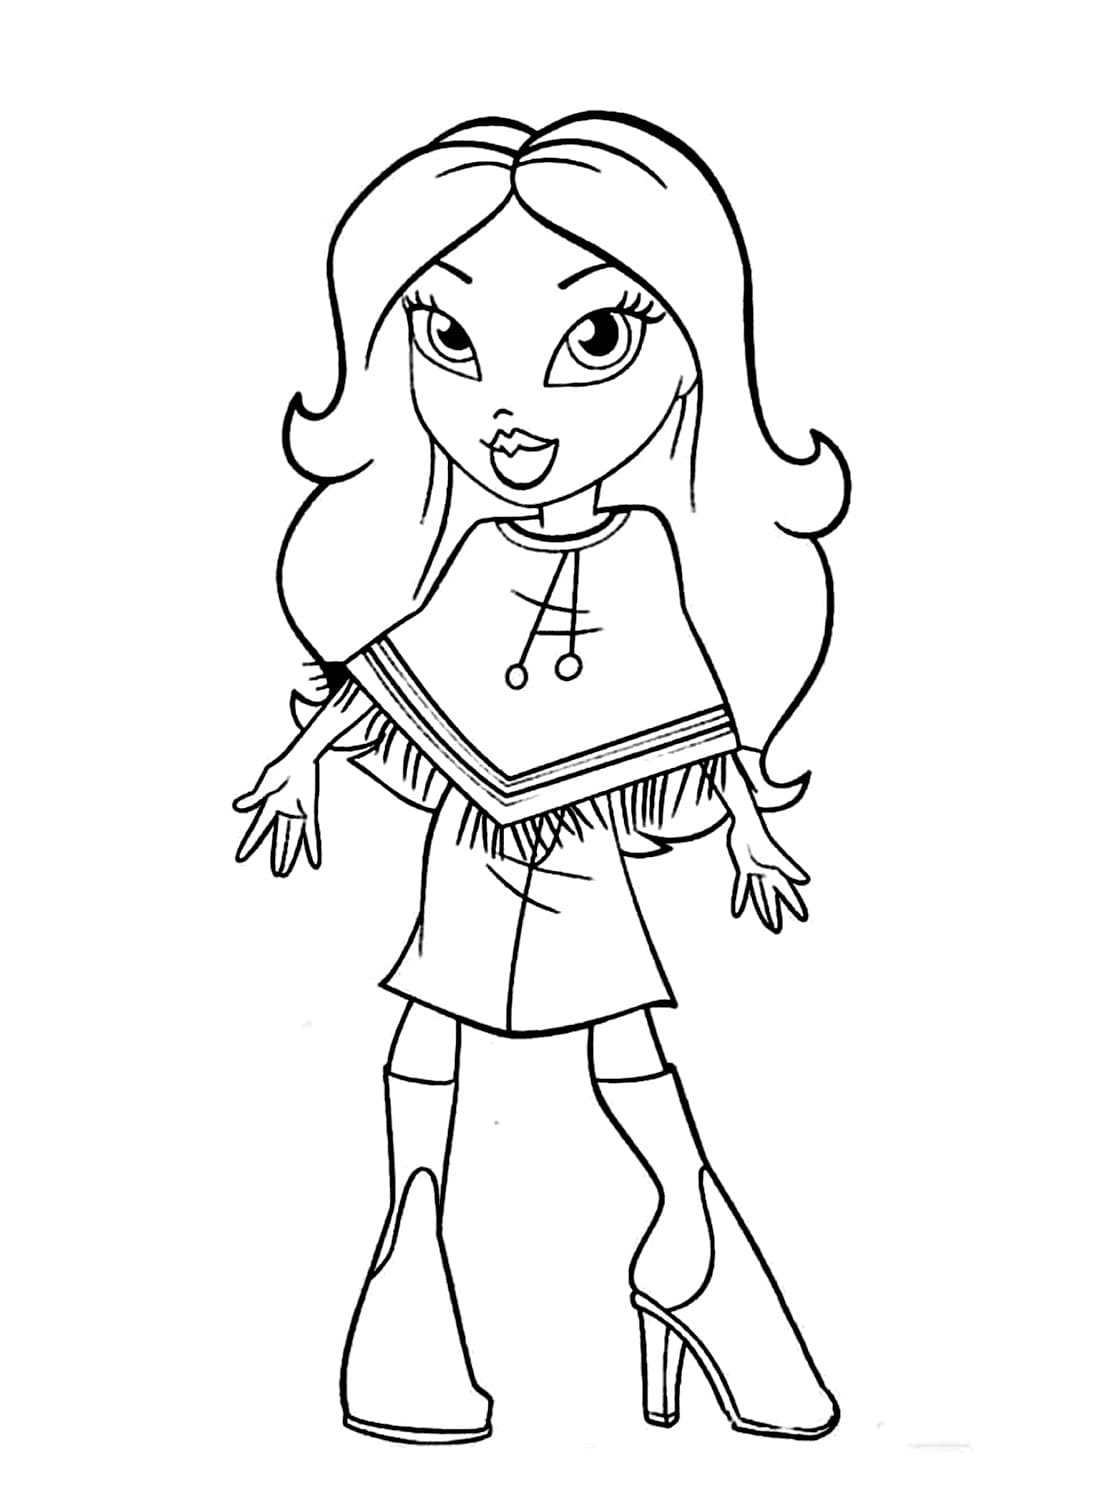 Bratz Sasha coloring page - Download, Print or Color Online for Free